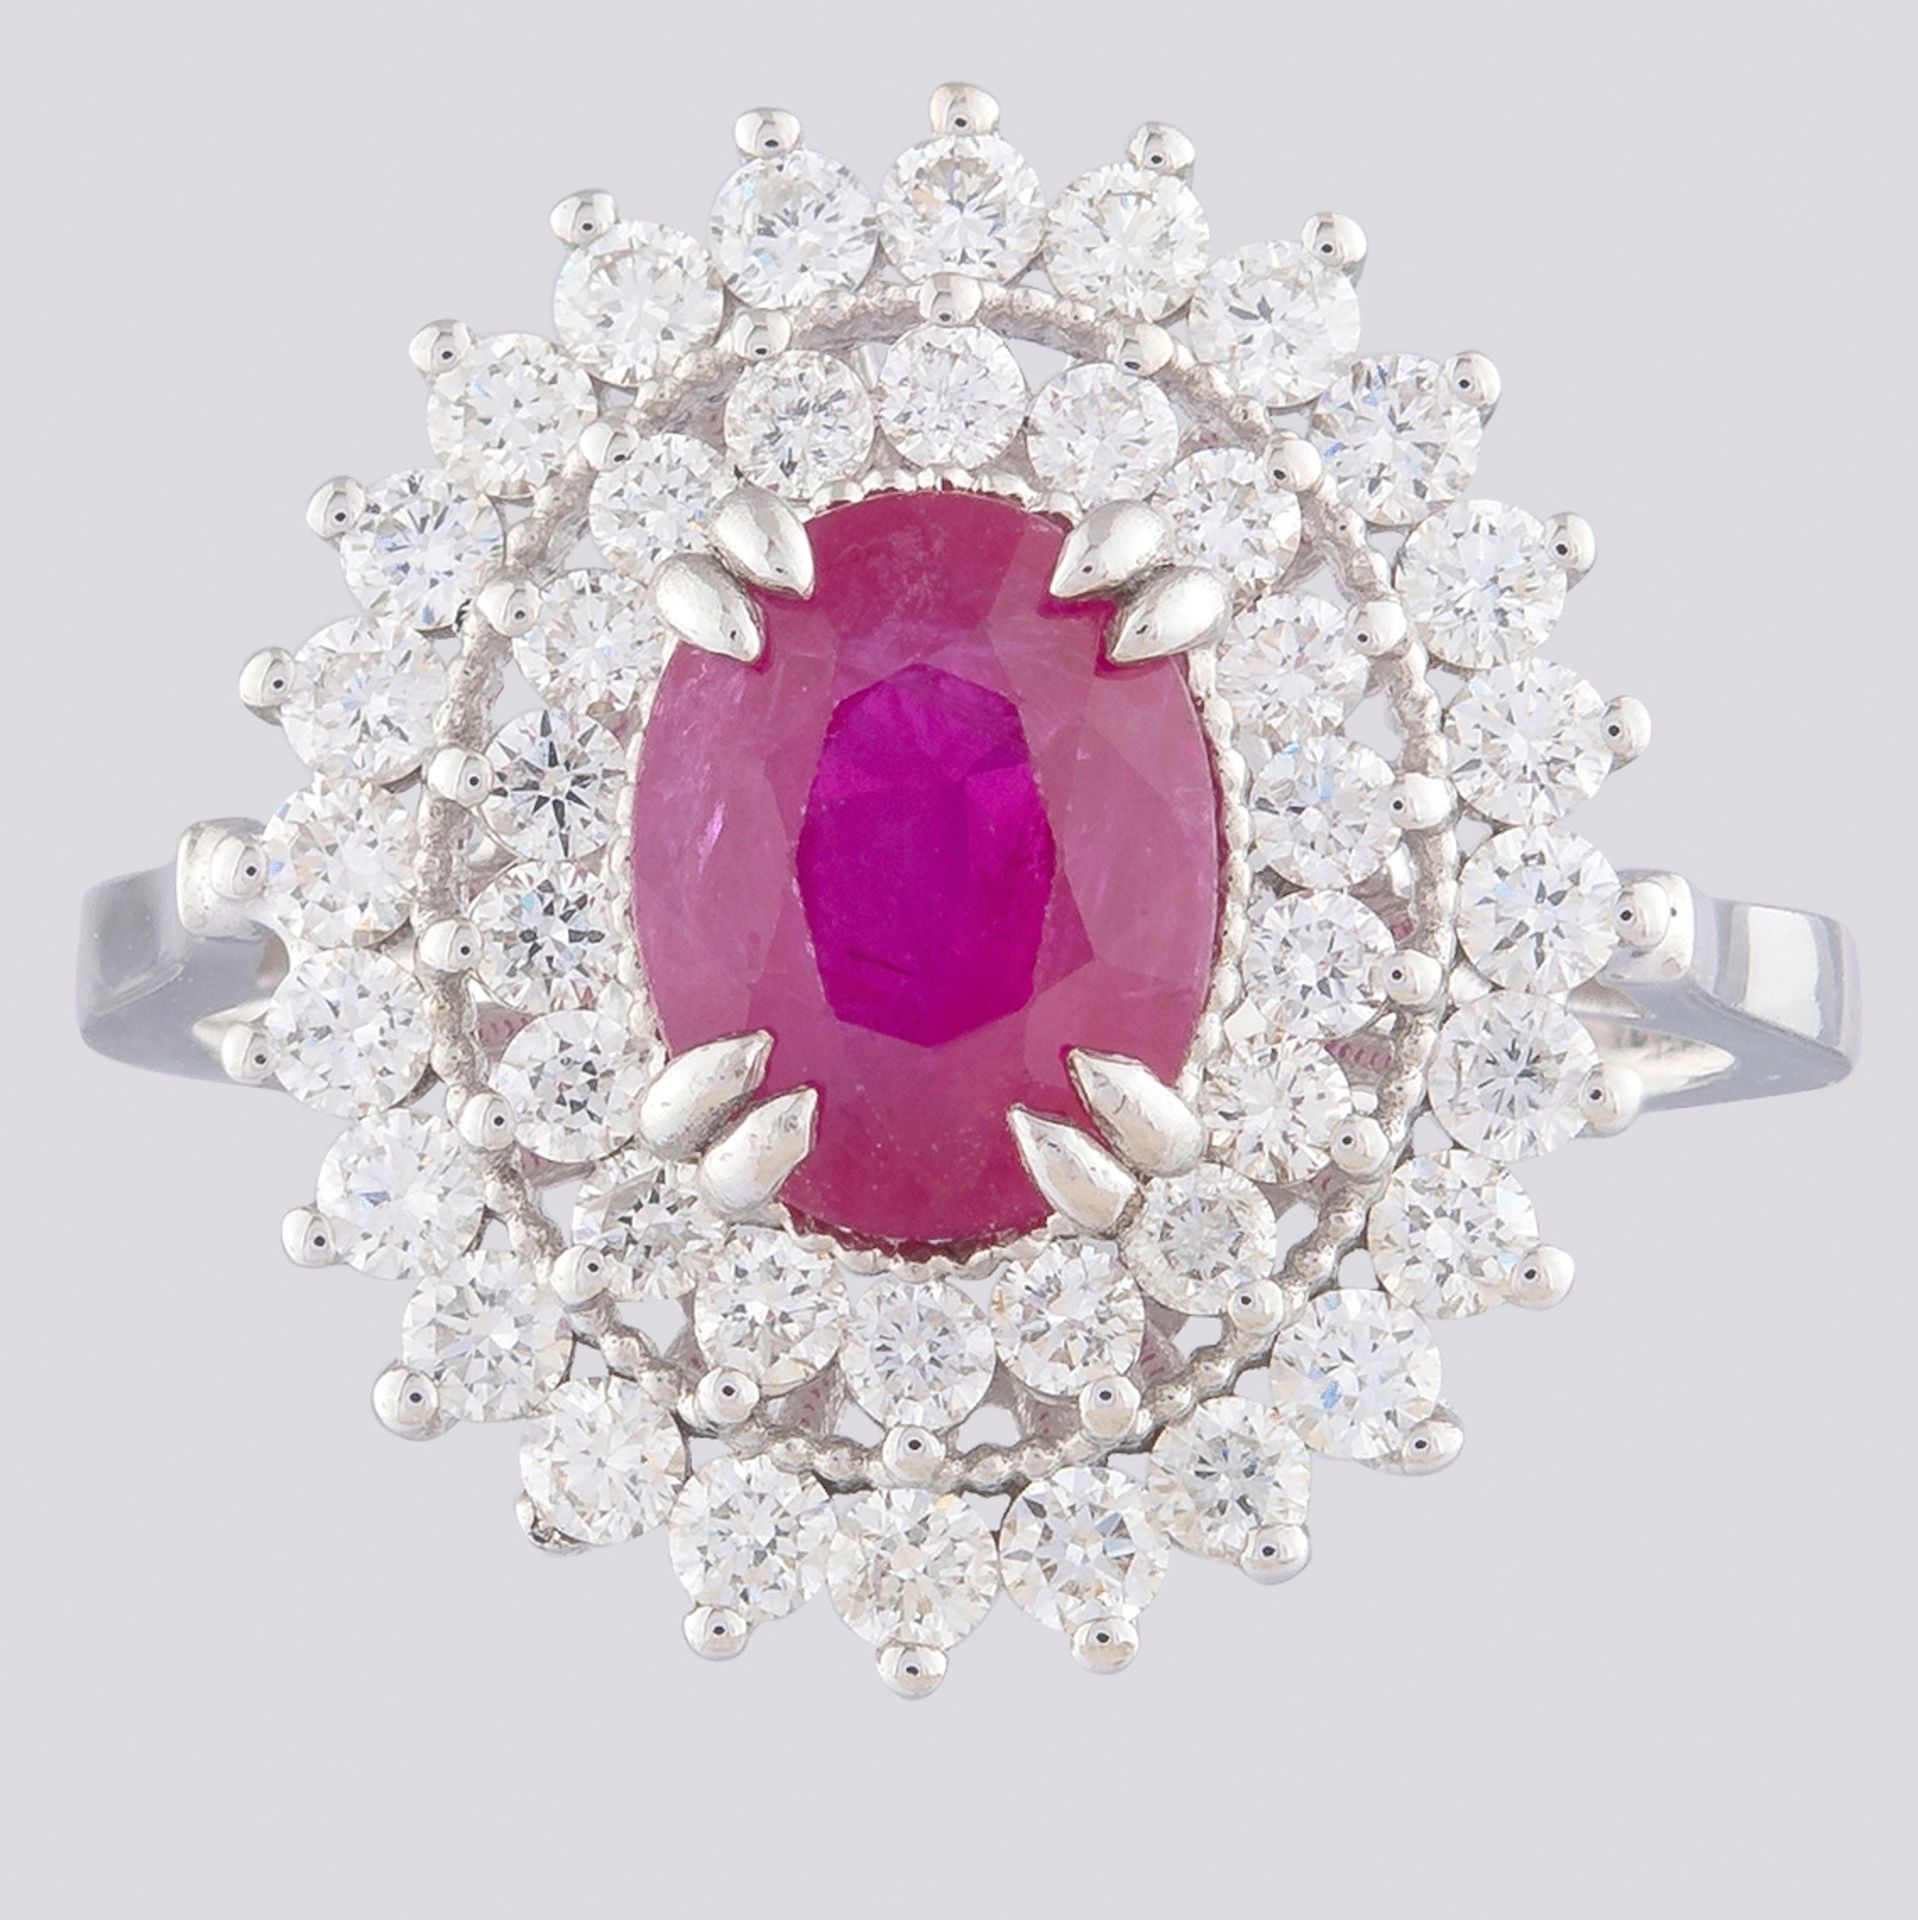 Certificated 14K White Gold Diamond & Ruby Ring - Image 3 of 4